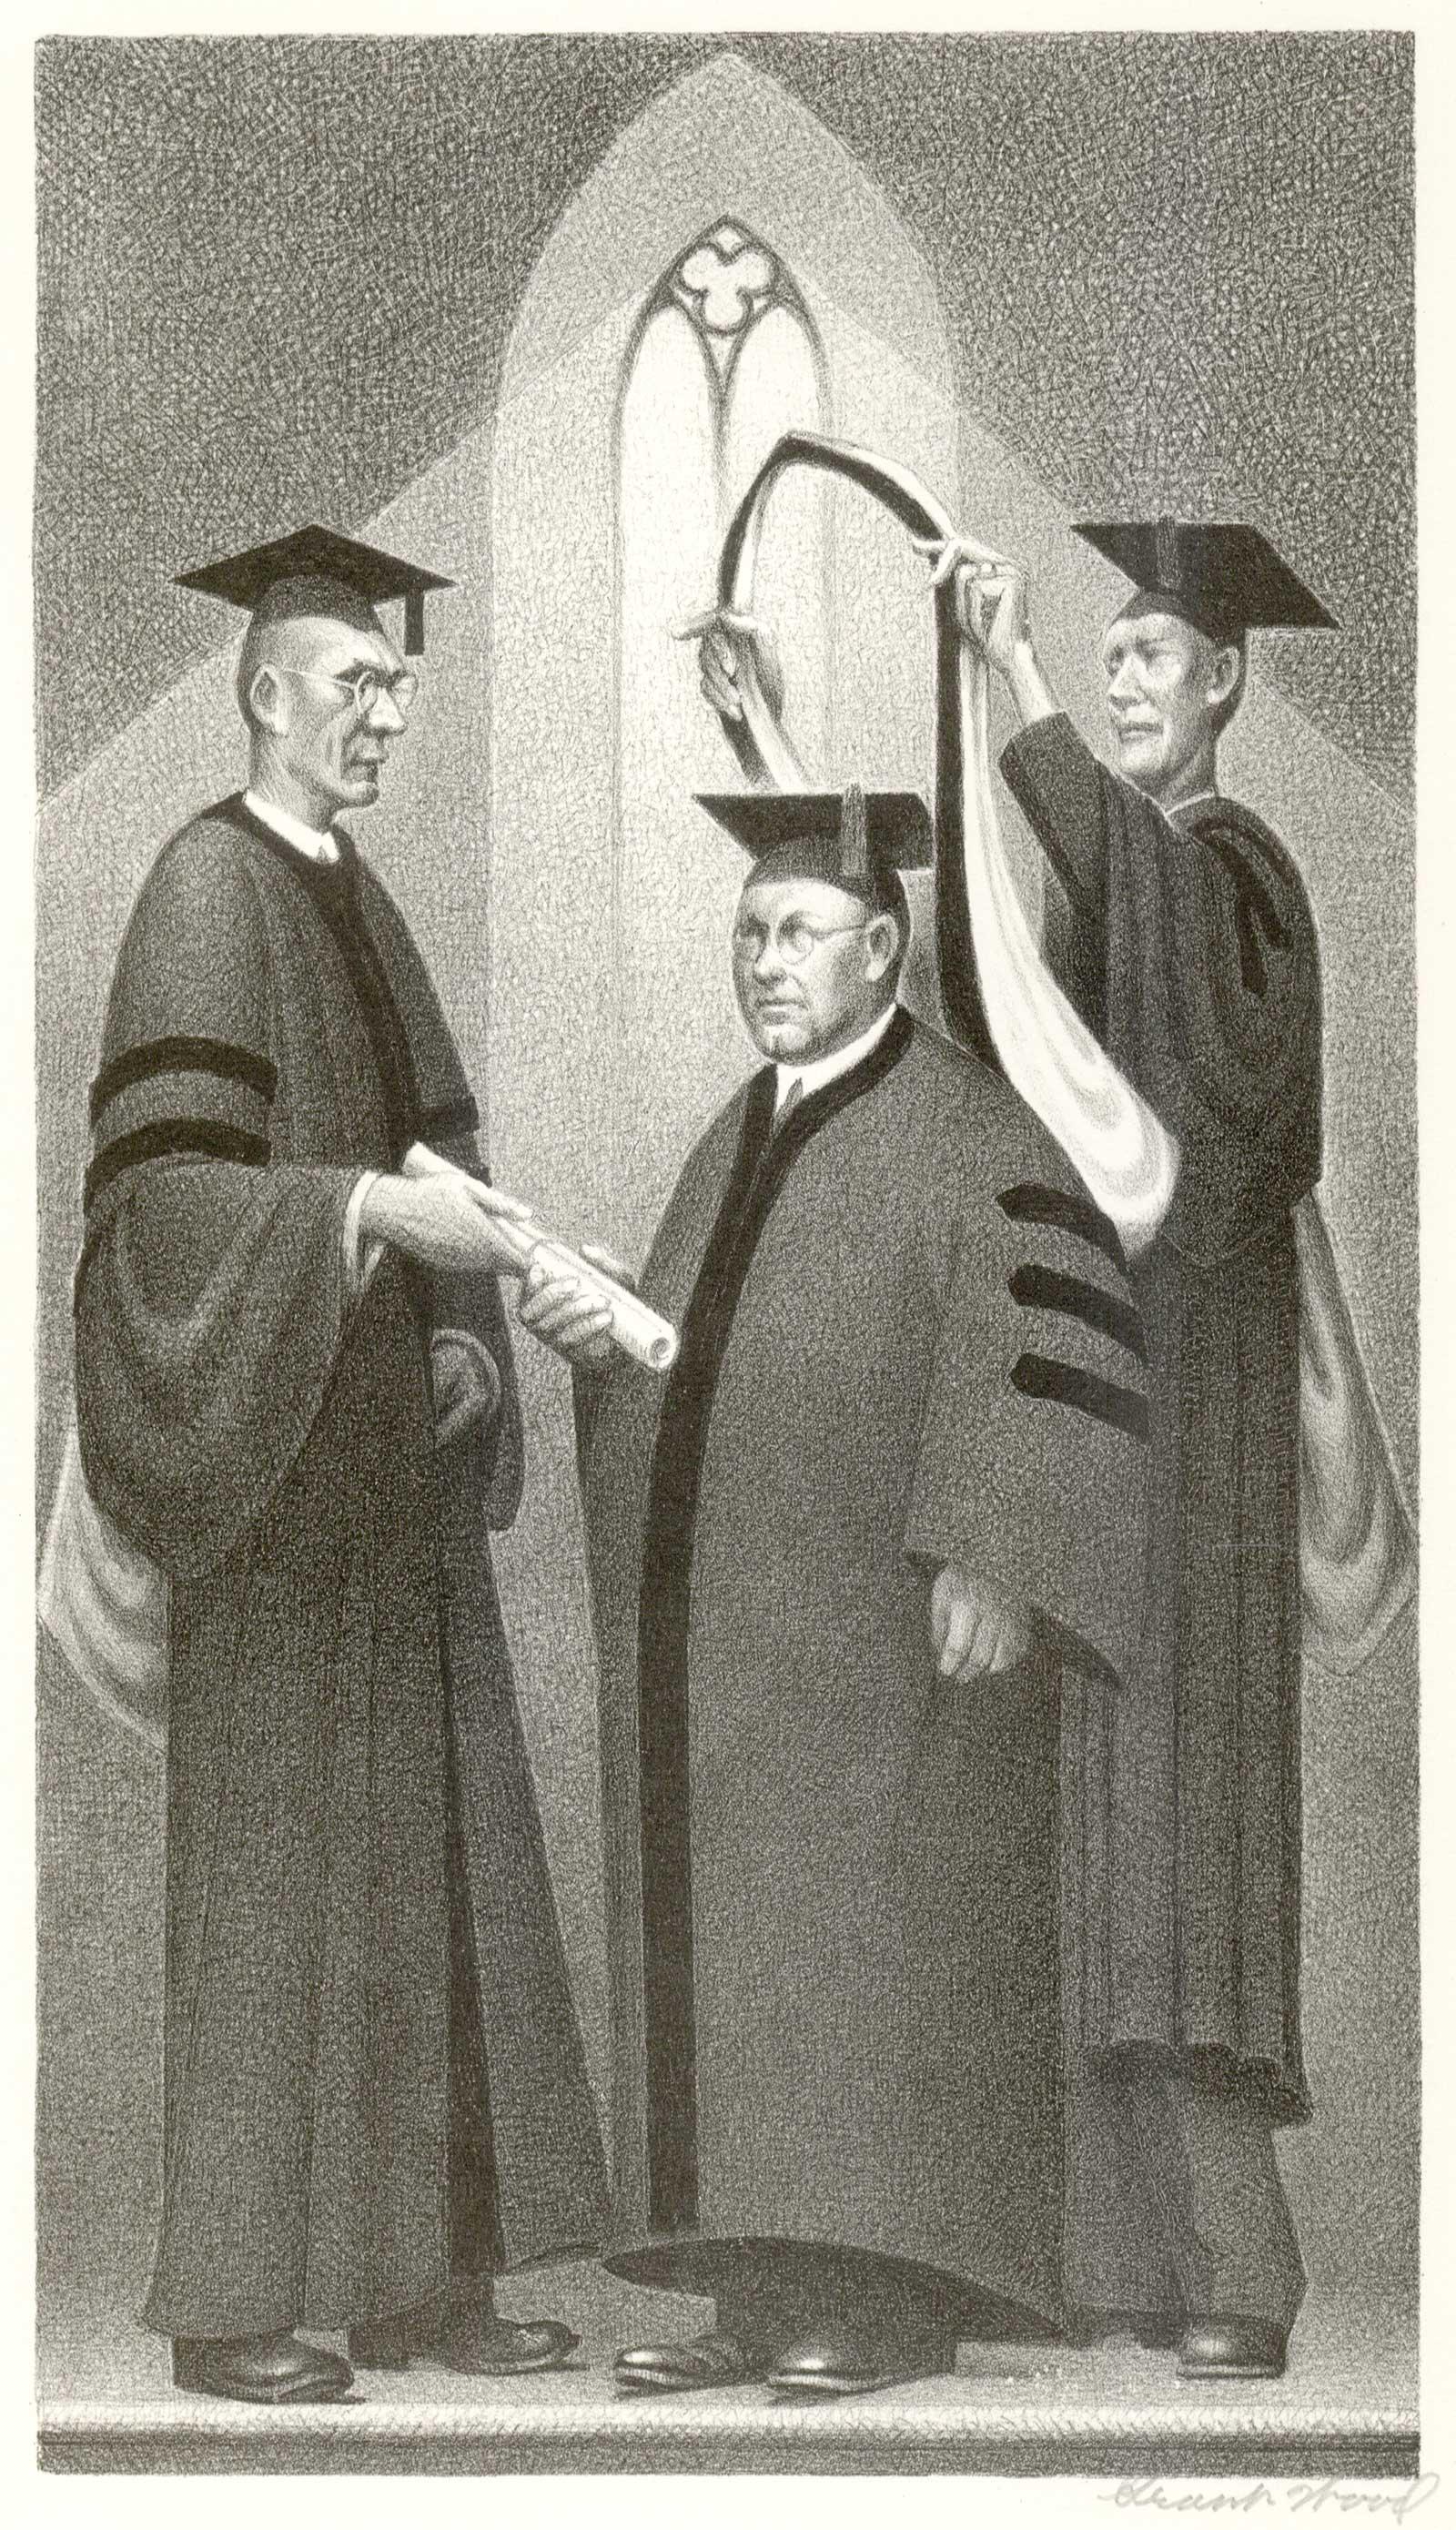 Honorary Degree (Self portrait of Grant Wood receiving an honorary degree) 2